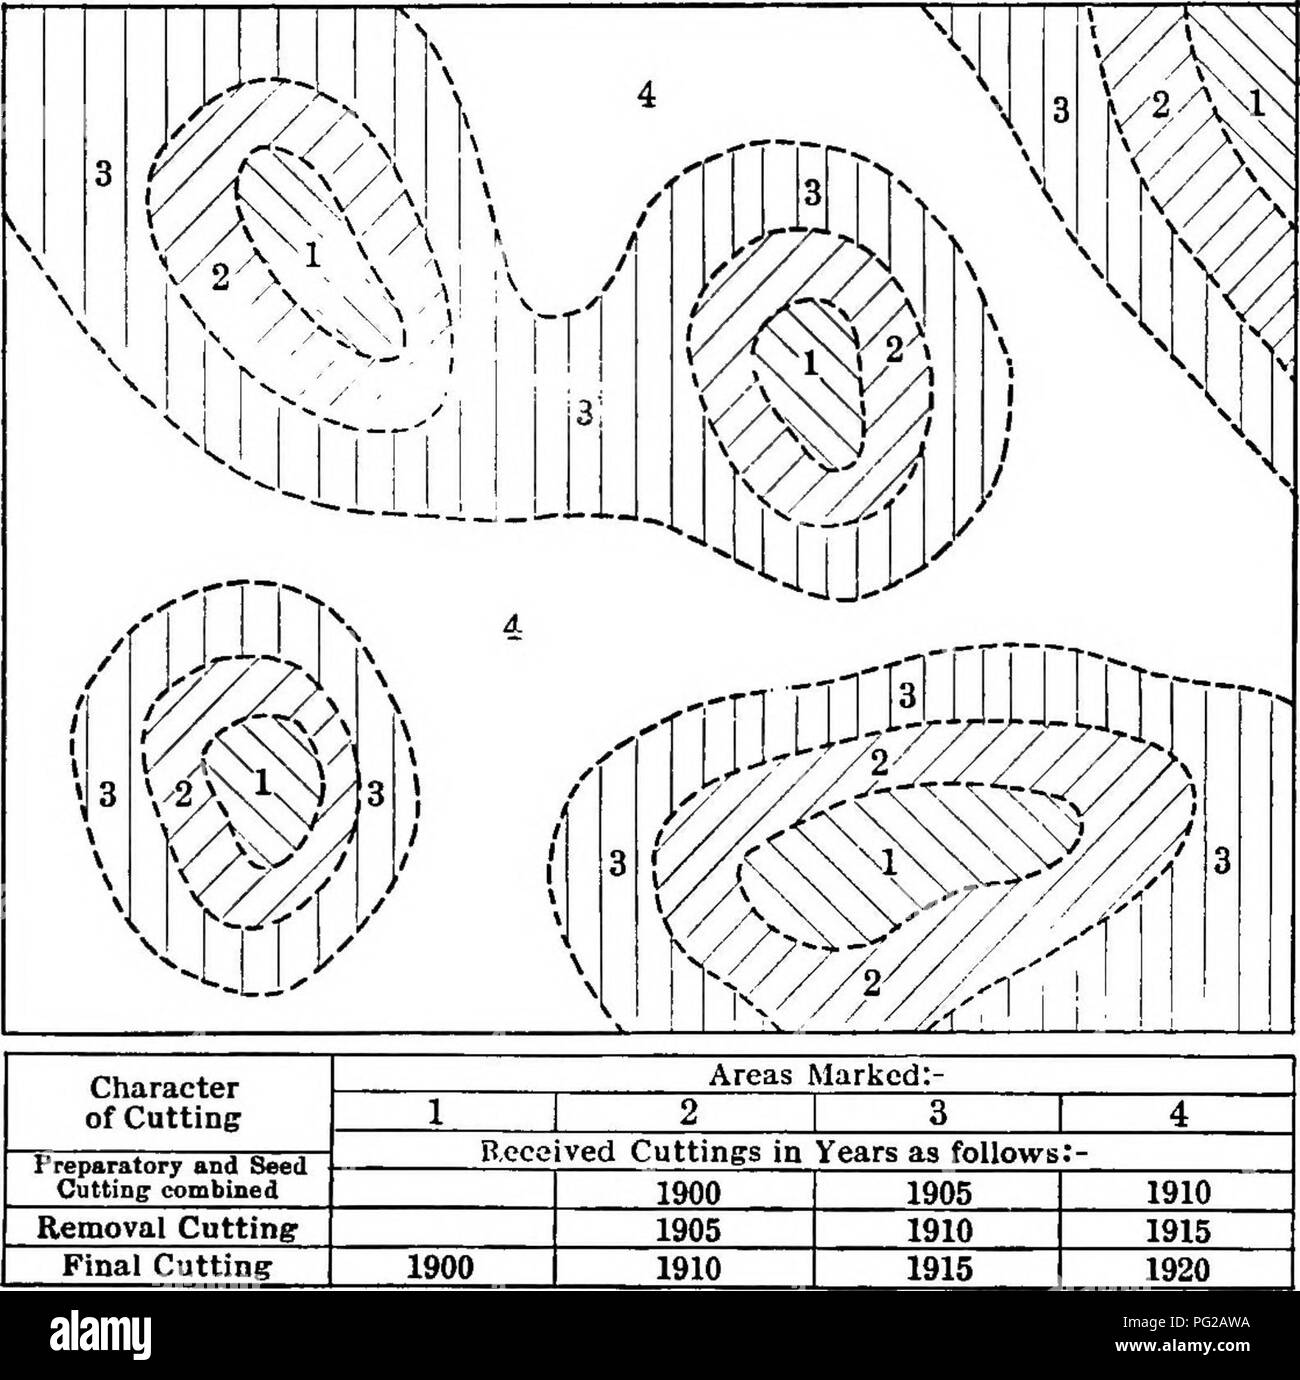 . The practice of silviculture : with particular reference to its application in the United States . Forests and forestry. MODIFICATIONS OF THE METHOD 75. Fig. 24. Arrangement of the cuttings in a stand reproduced by the group shelterwood method. Advance reproduction was present on areas marked &quot; 1&quot; before the cutting. permit its application in an extensive way under poor market conditions and in the absence of permanent roads have been developed. Summarized, these modifications consist in: Reducing the total number of cuttings to two or three, Lengthening the period of regeneration, Stock Photo